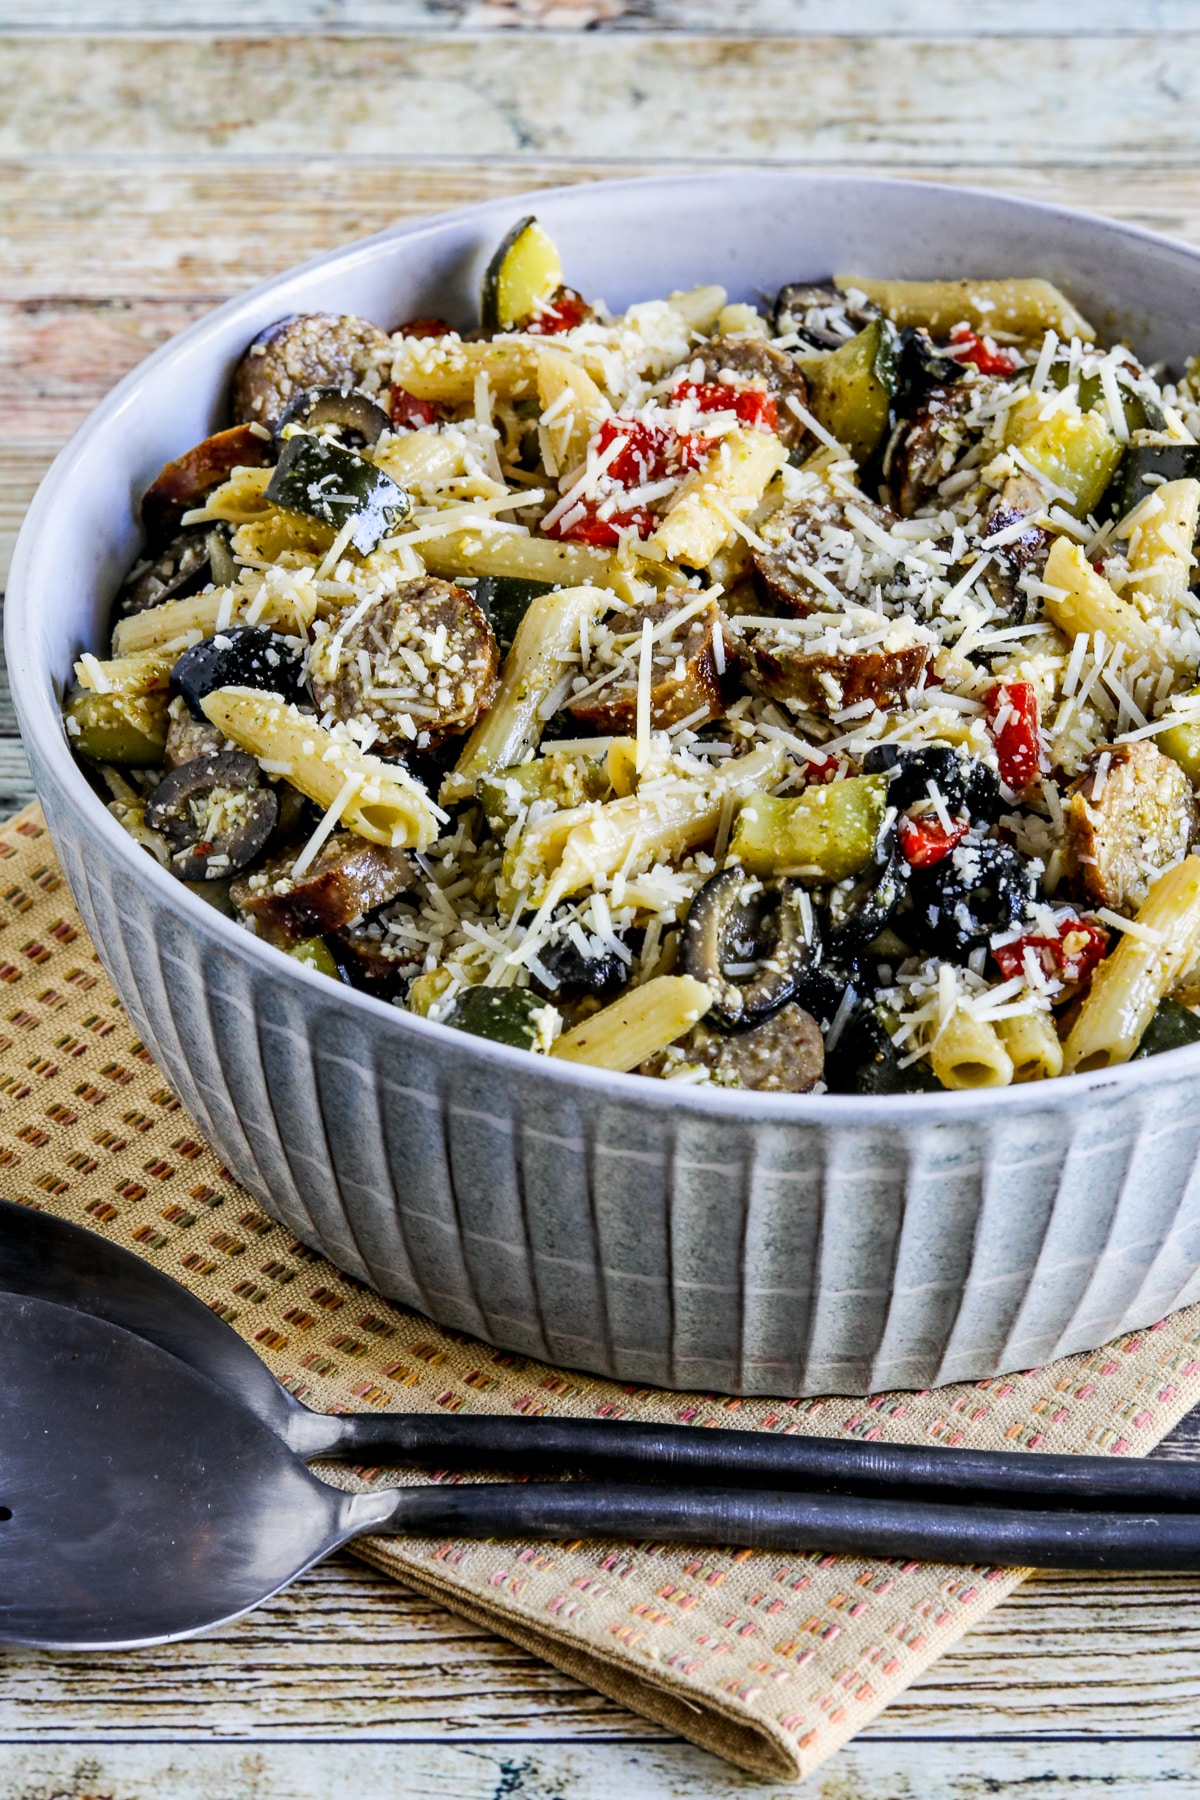 Pasta salad with sausage, zucchini, olives and peppers displayed in a napkin serving bowl.